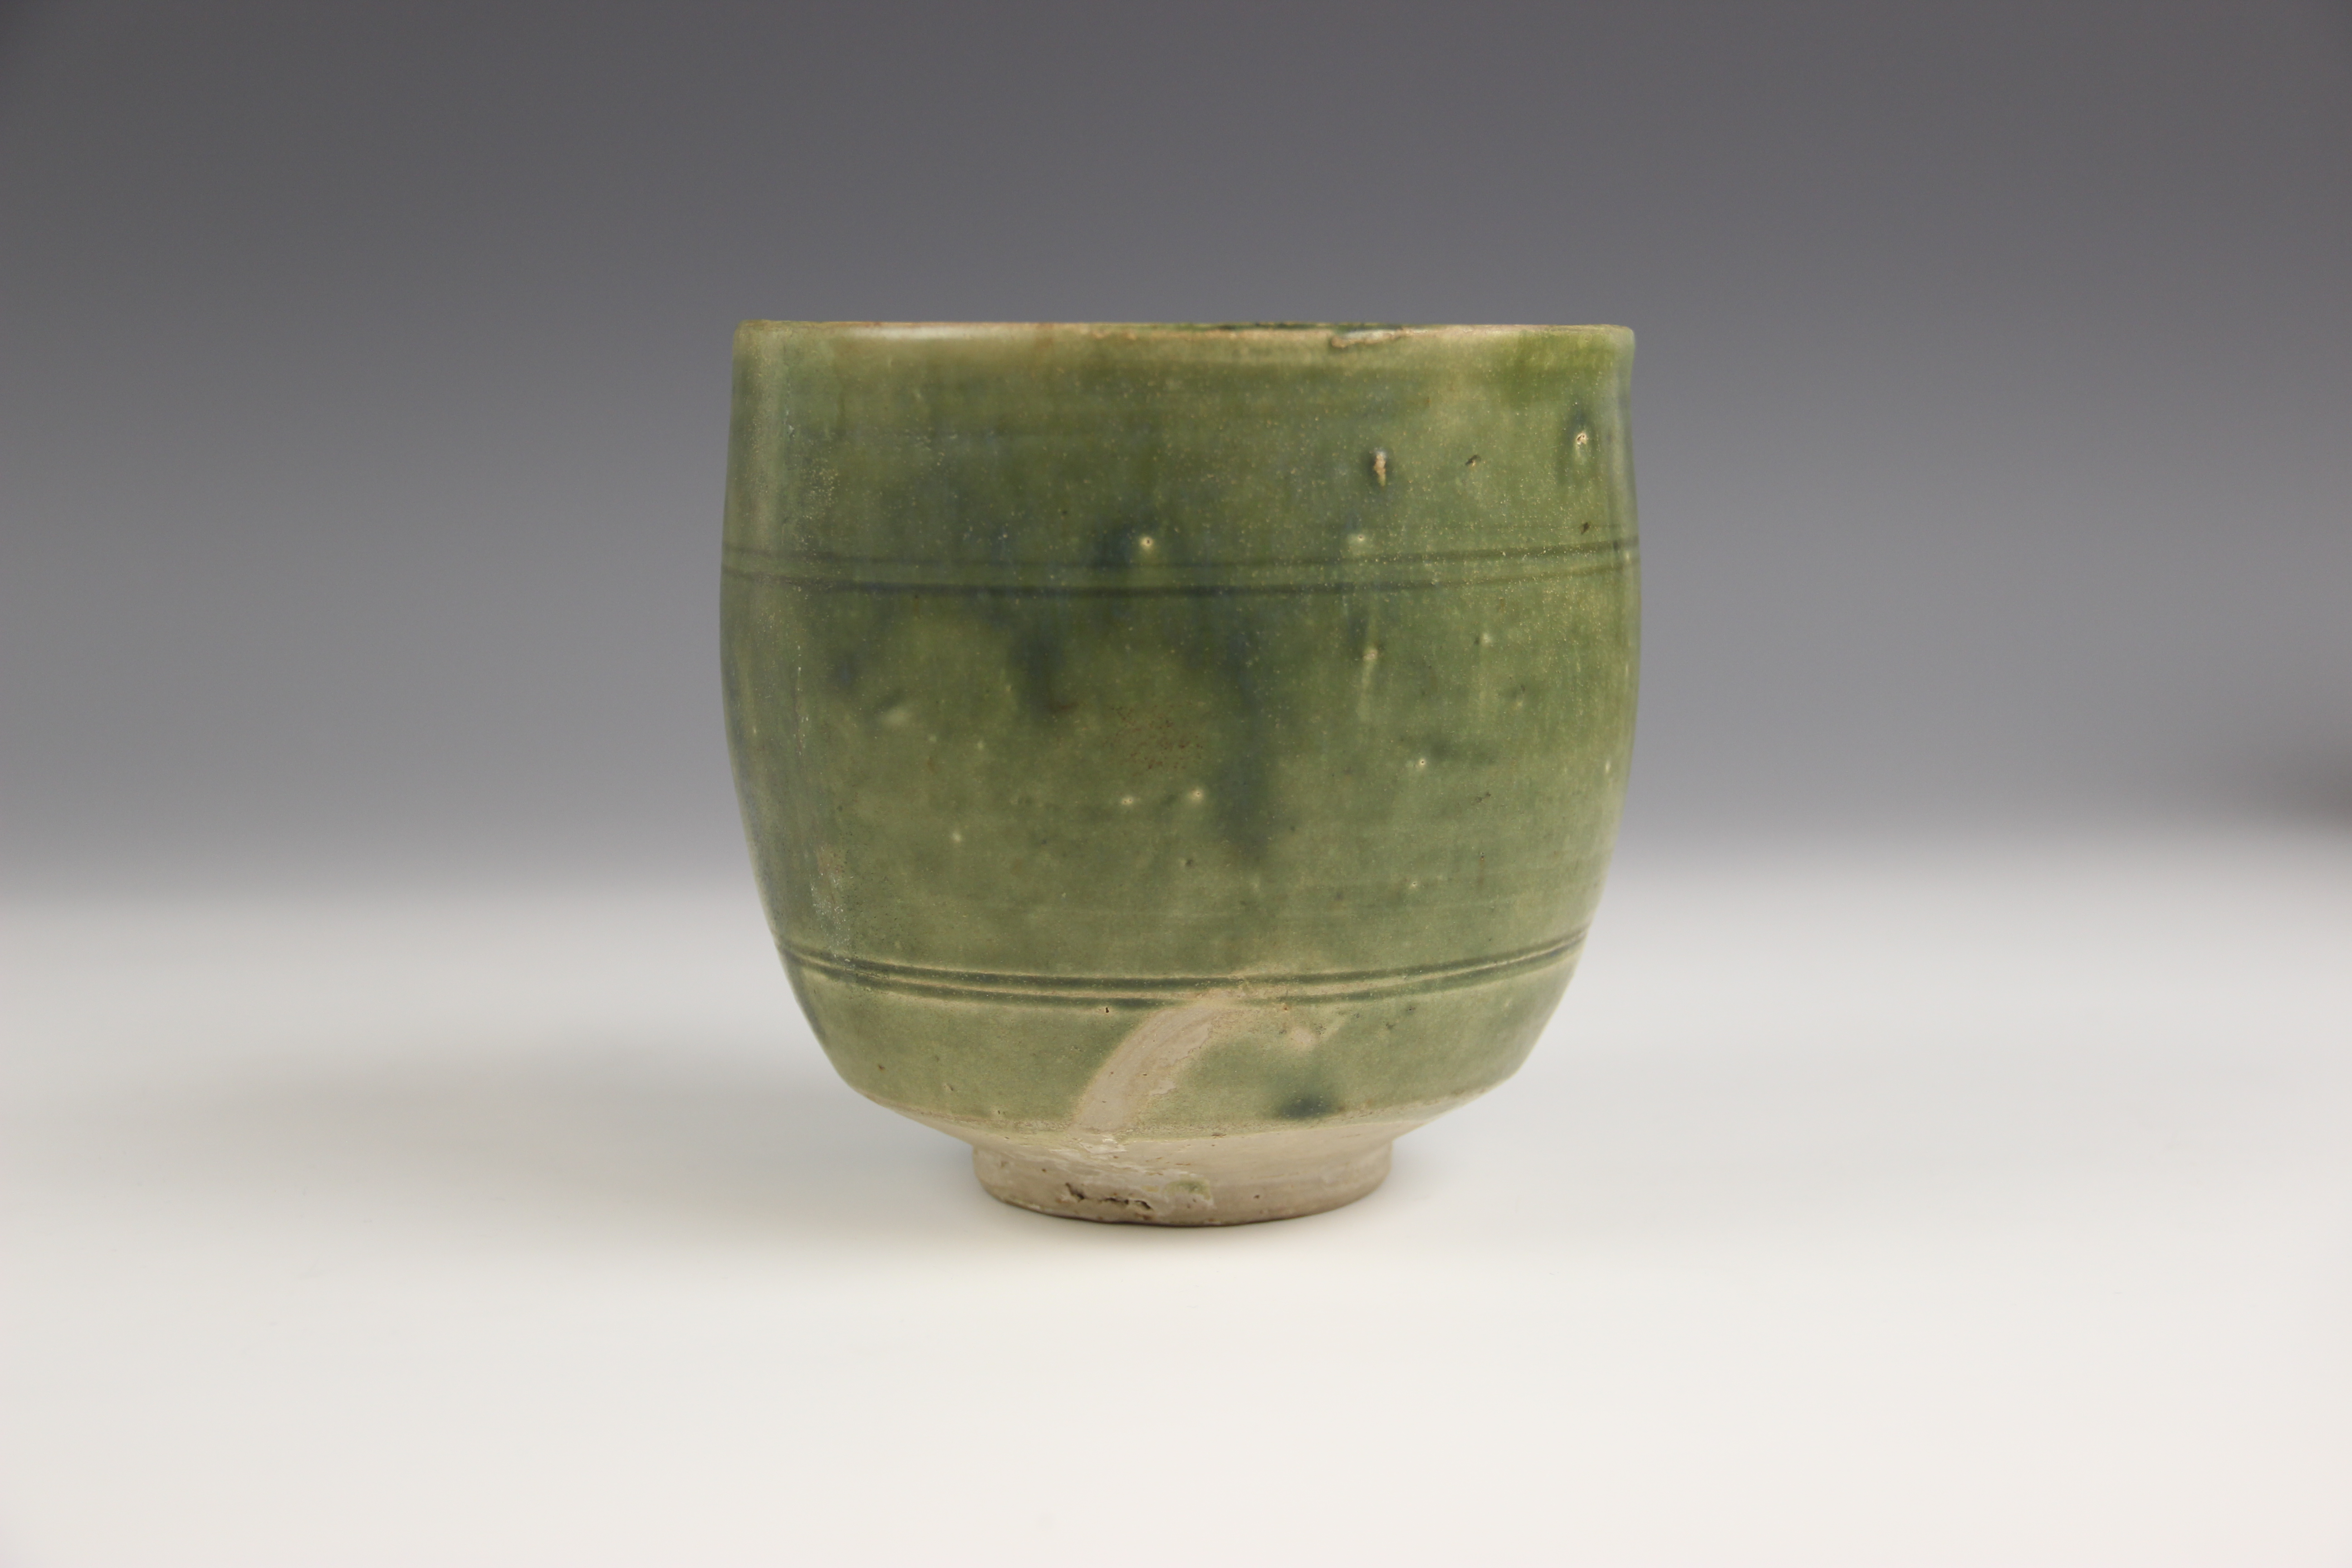 An Anamese pottery vessel, possibly 15th century, the cylindrical vase celadon glazed to the - Image 7 of 9